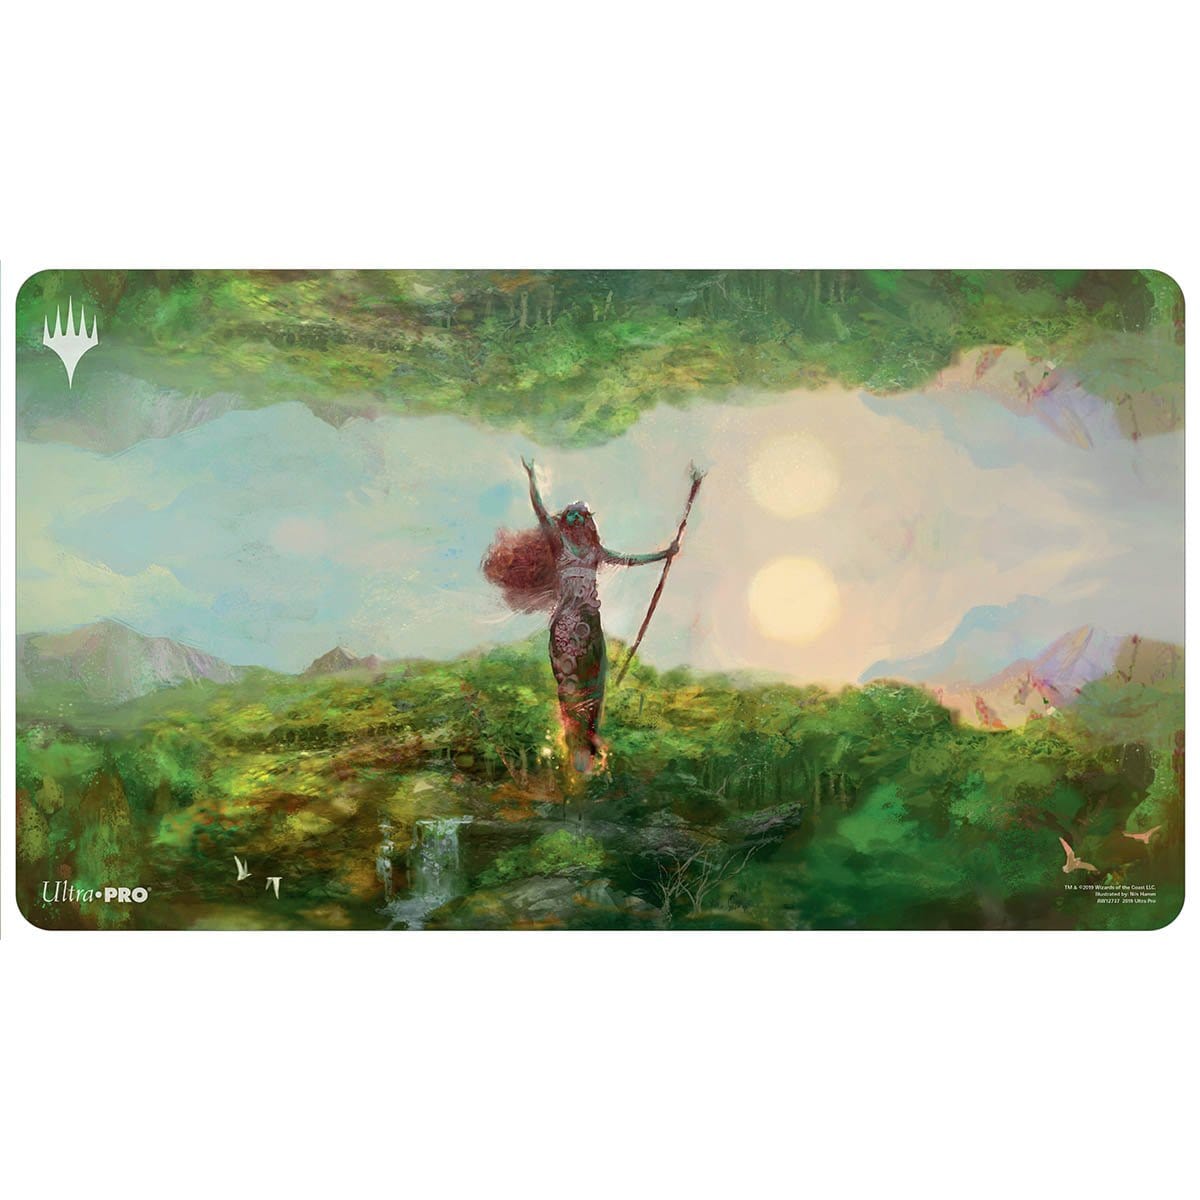 Fastbond Playmat - Playmat - Original Magic Art - Accessories for Magic the Gathering and other card games